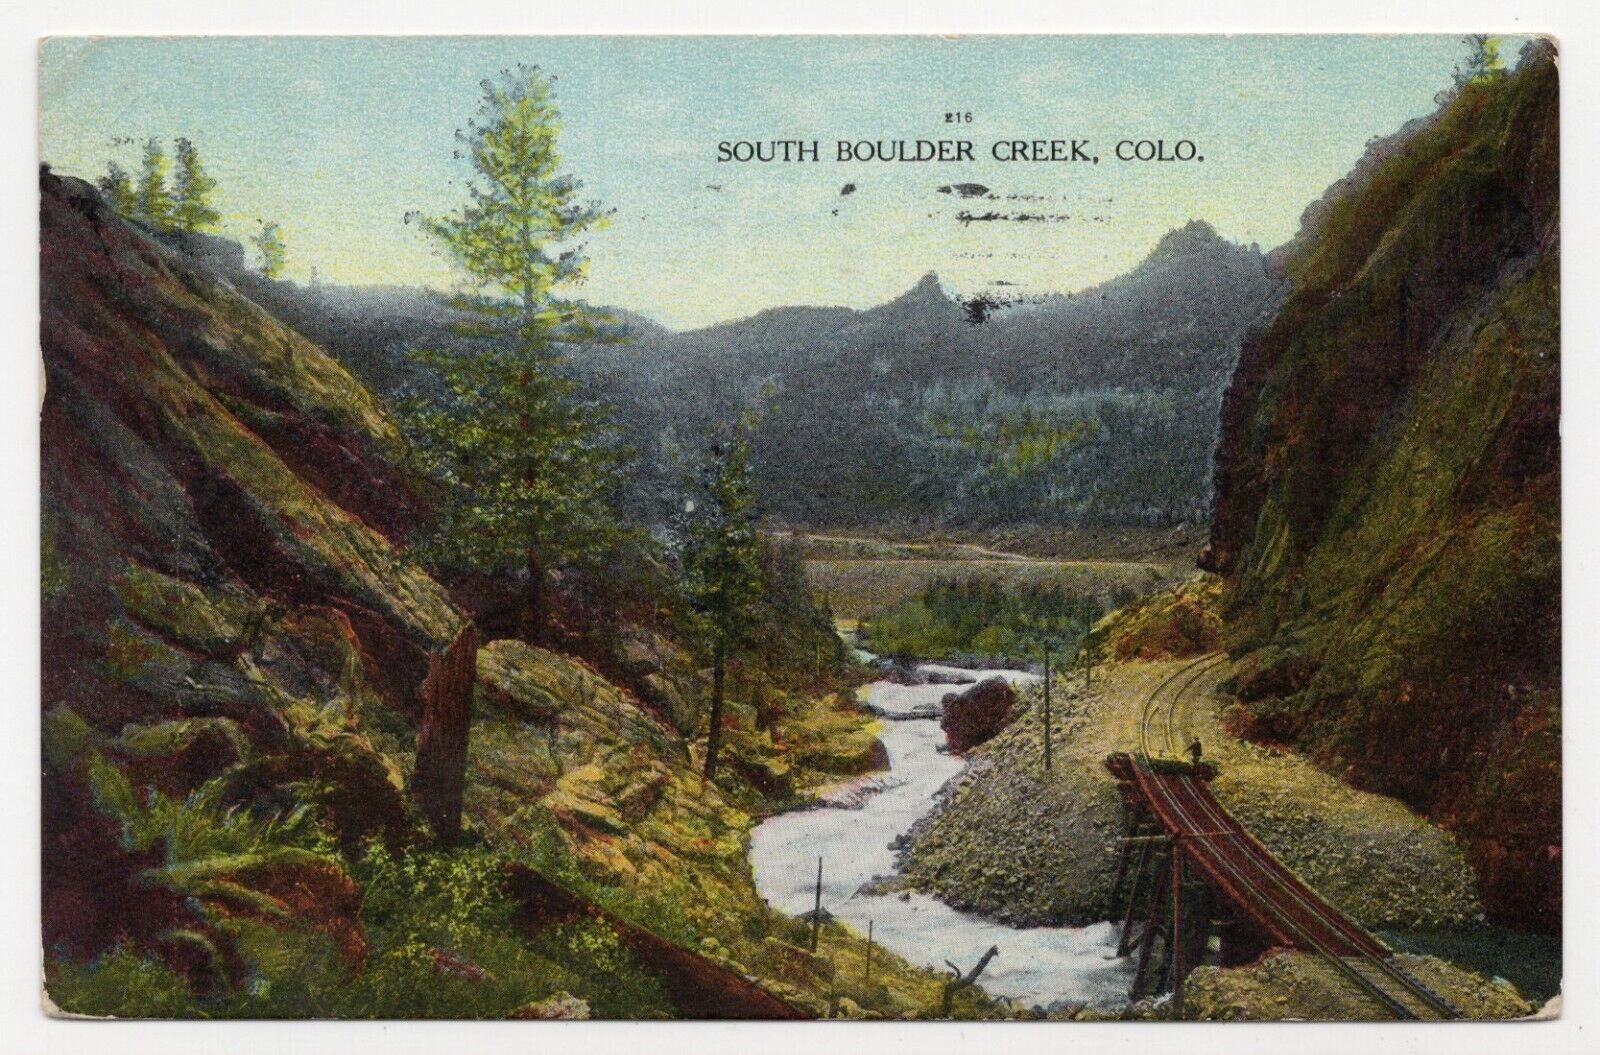 South Boulder Creek Colorado Trout Fishing Note 1909 Posted Postcard